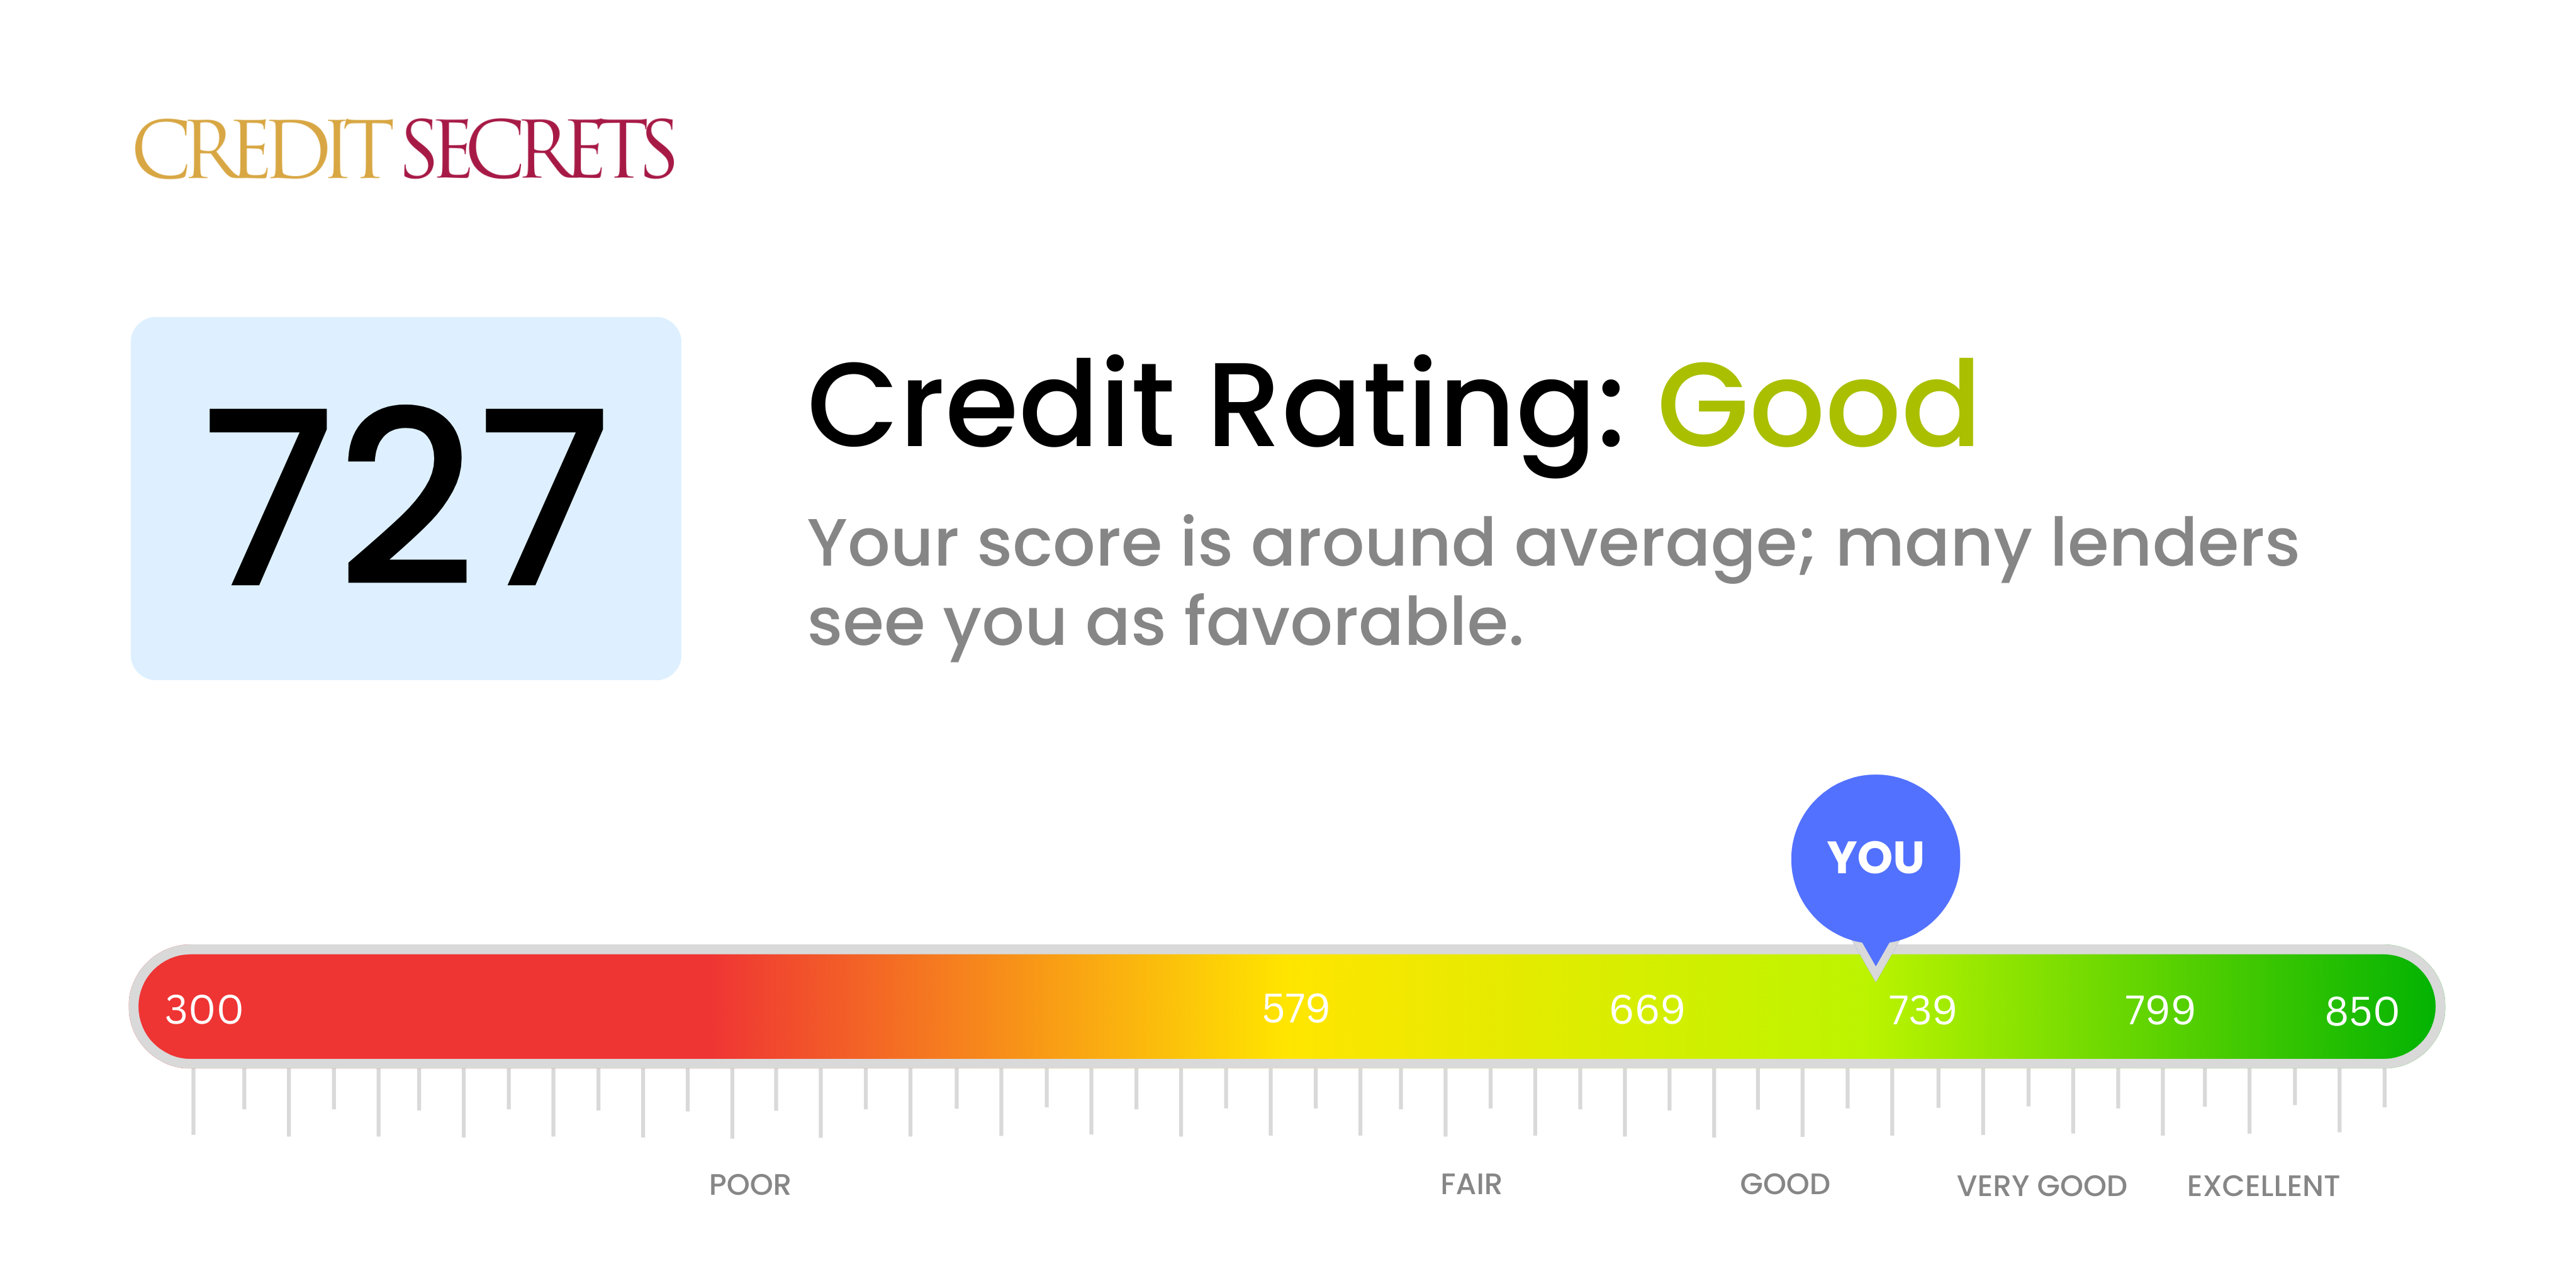 Is 727 a good credit score?